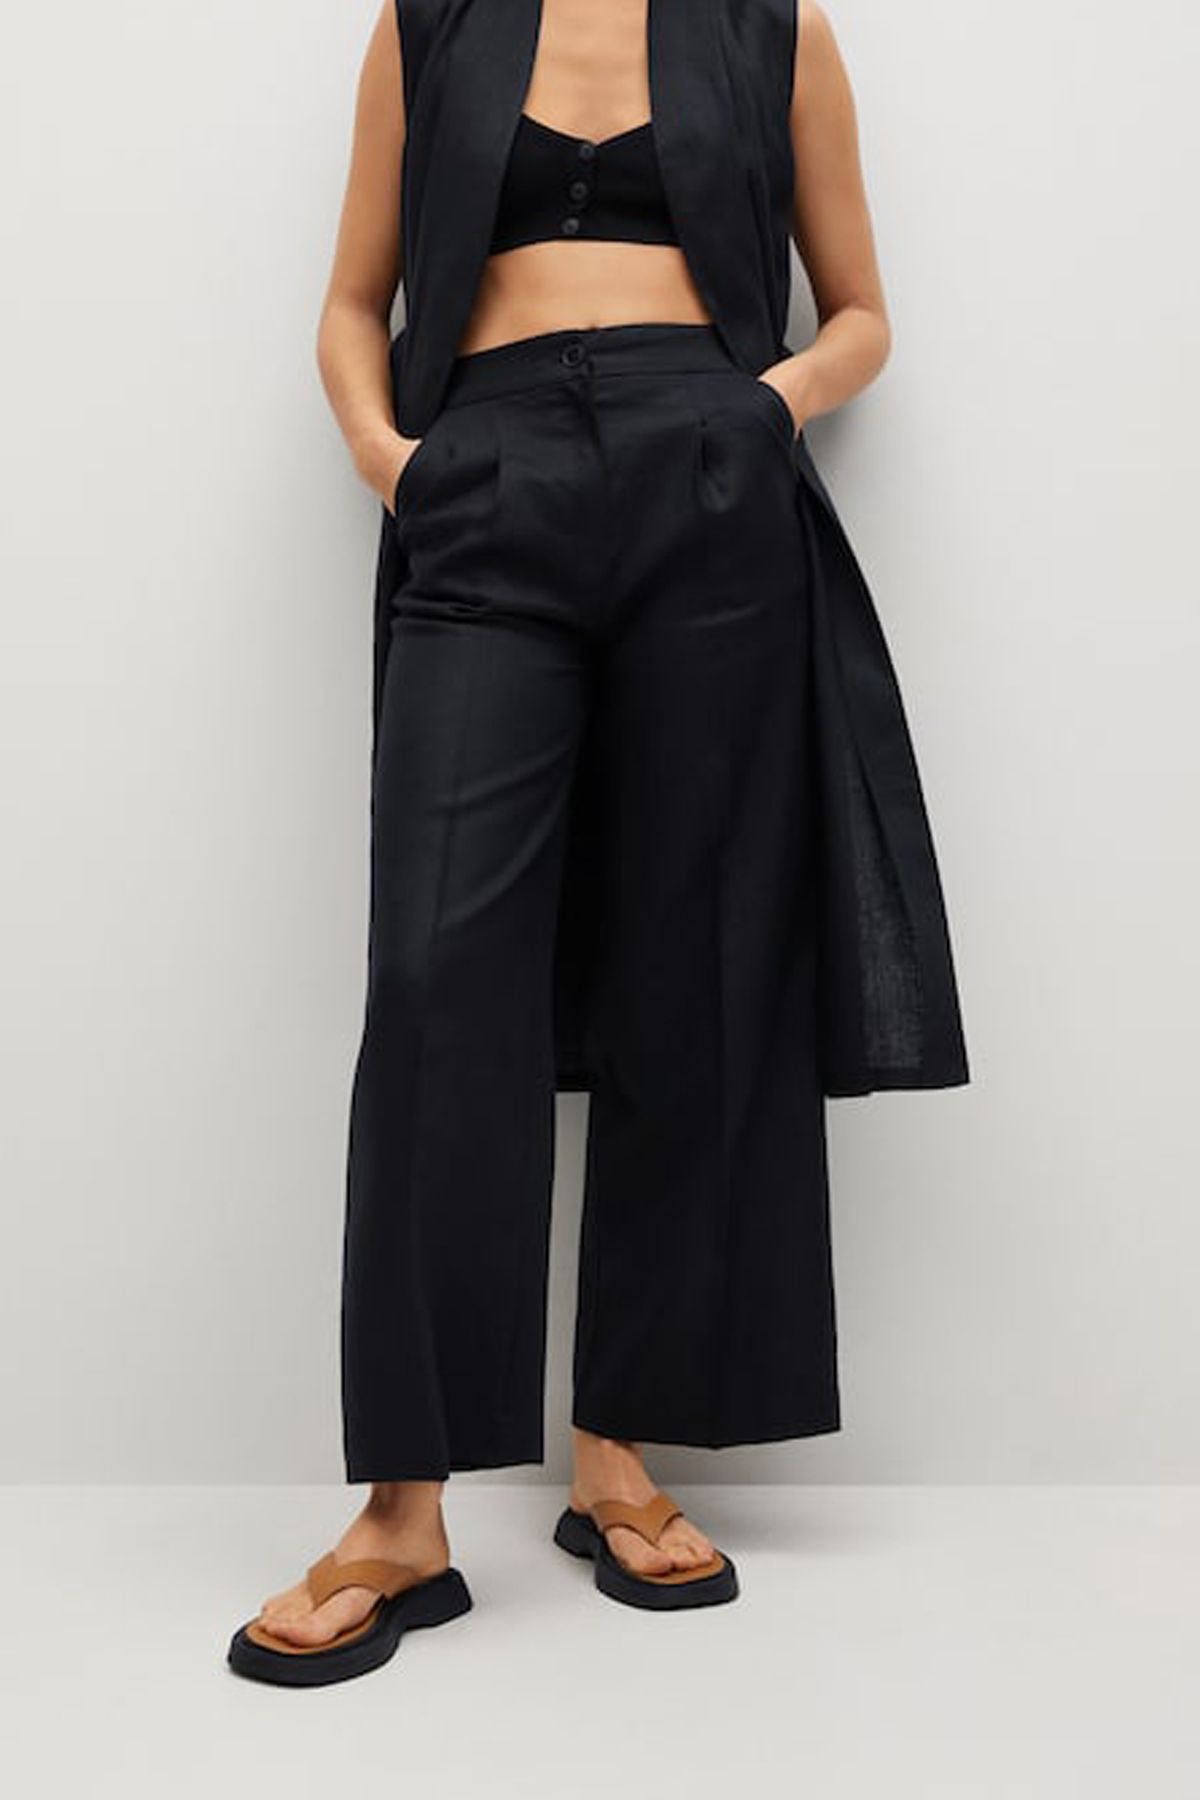 MANGO Wide & Flare Pants for Women sale - discounted price | FASHIOLA INDIA